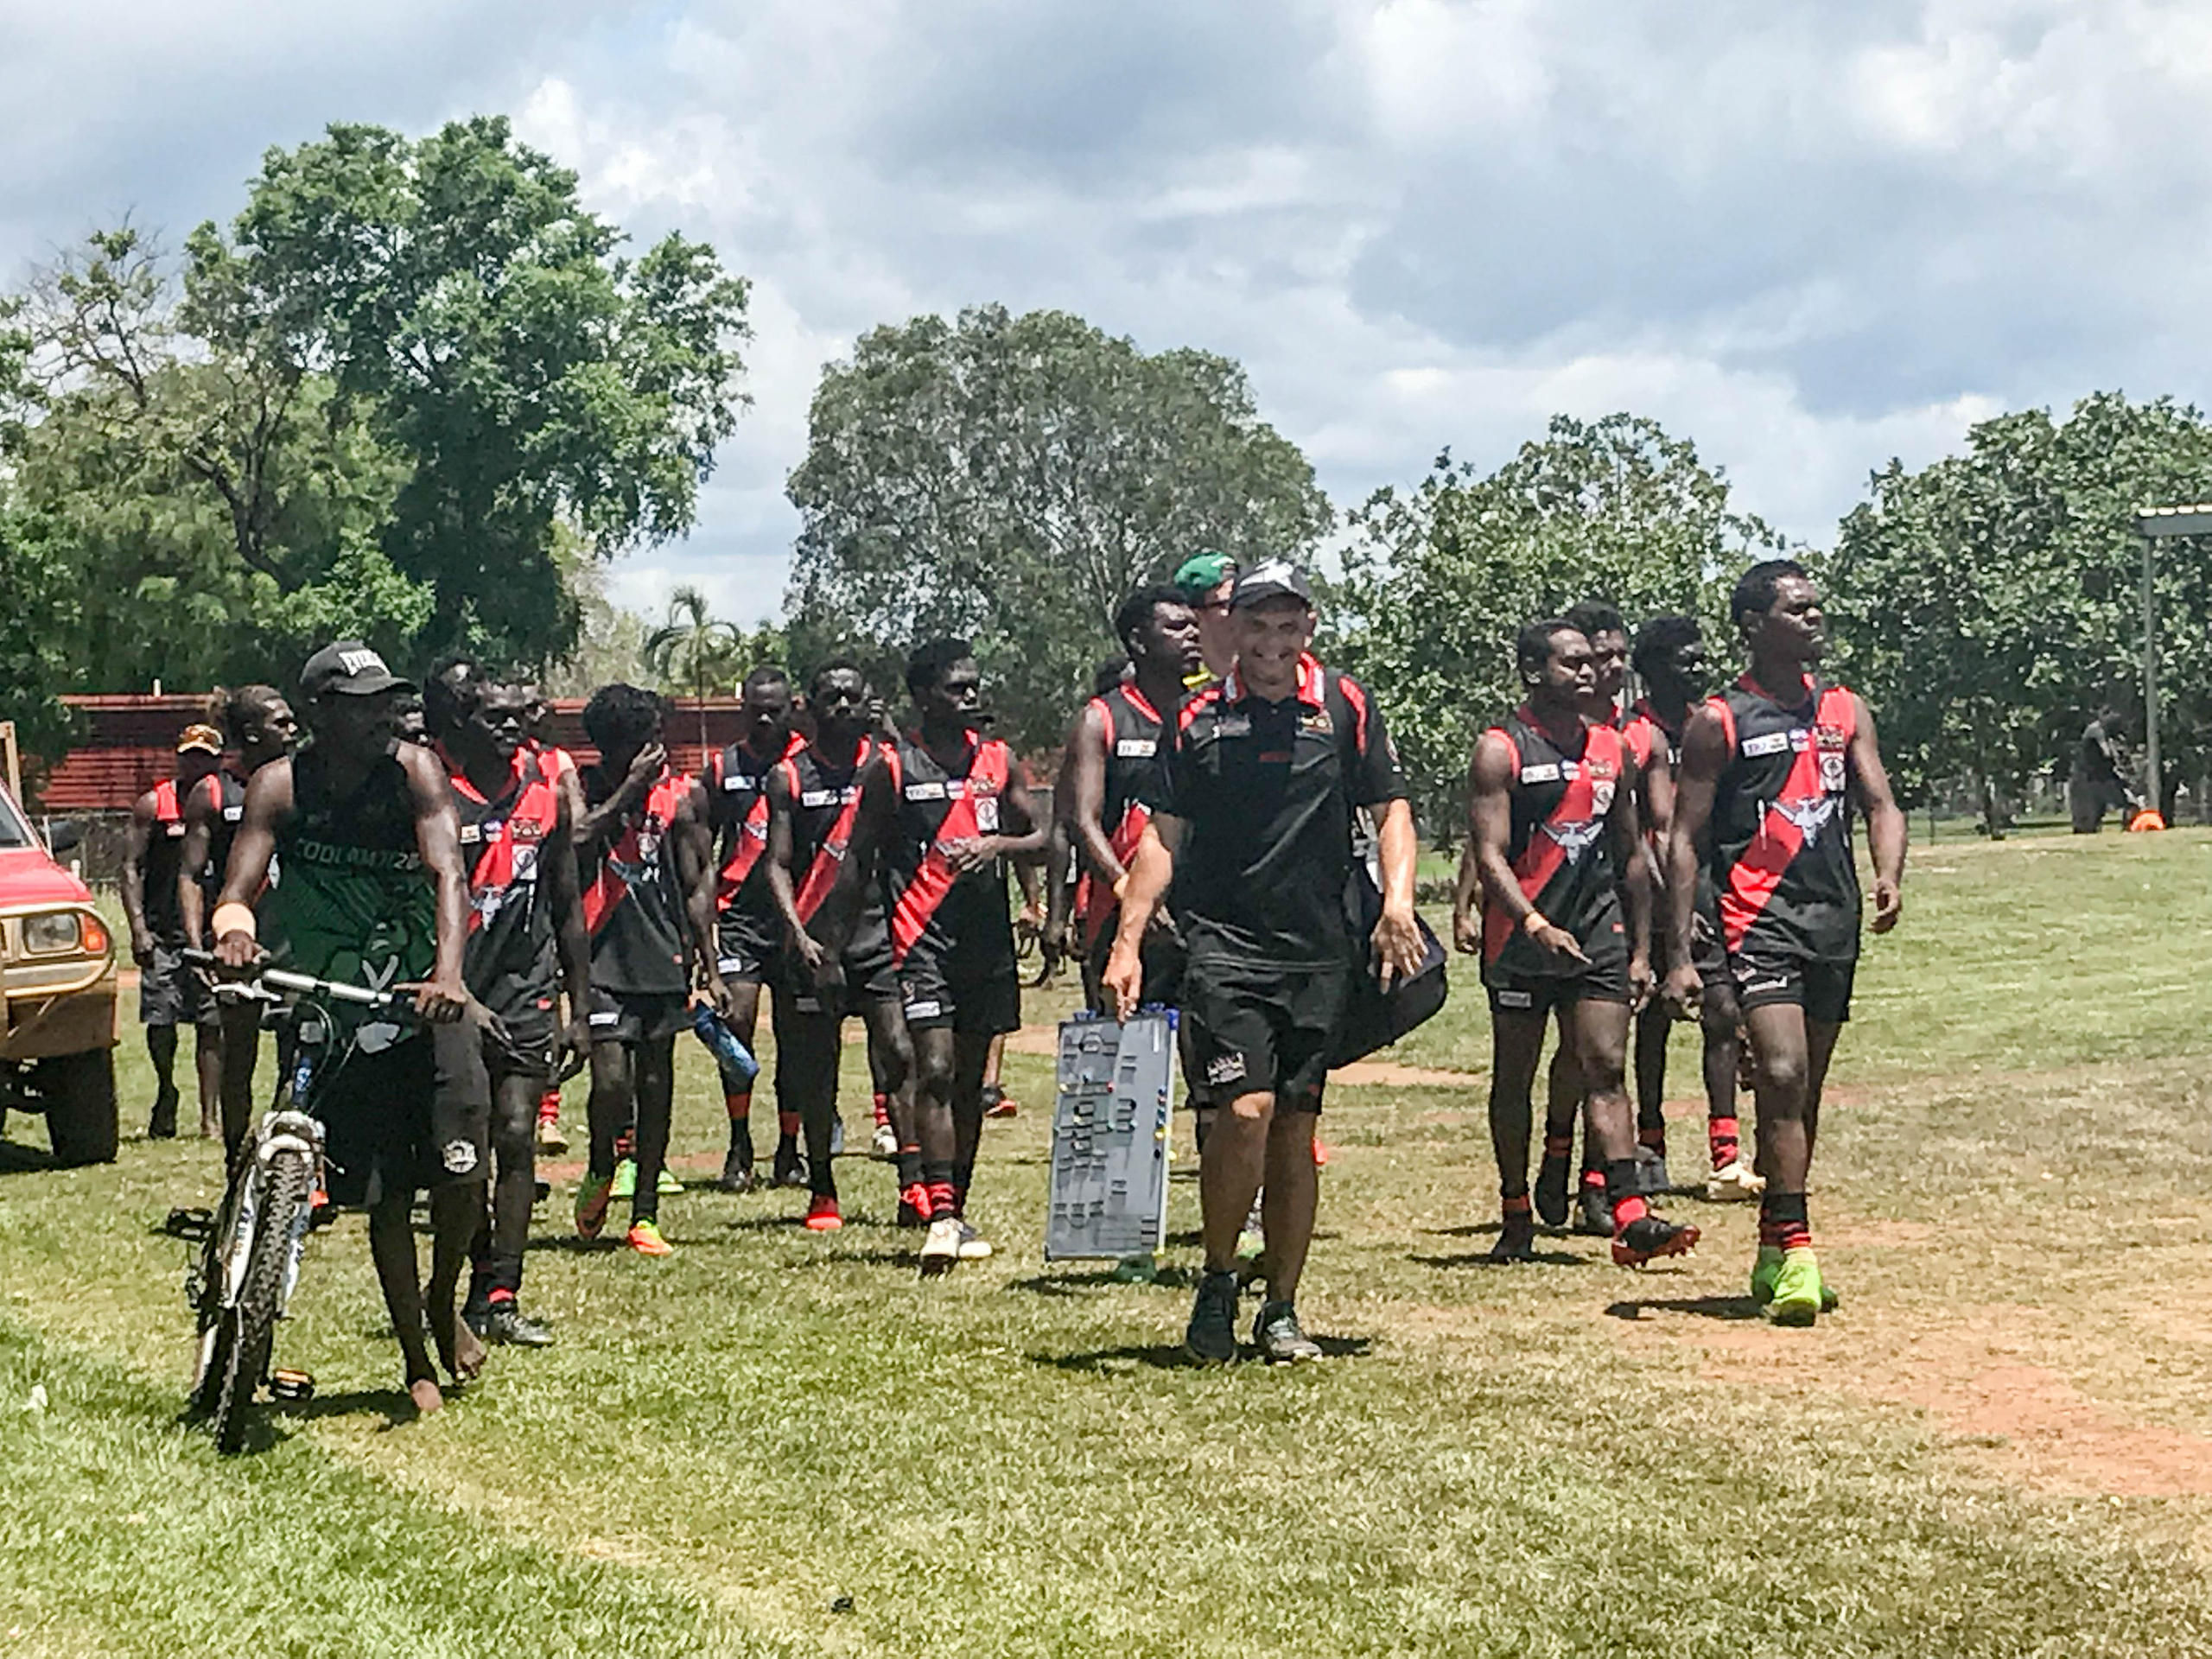 A team of Tiwi footy players entering the playfield